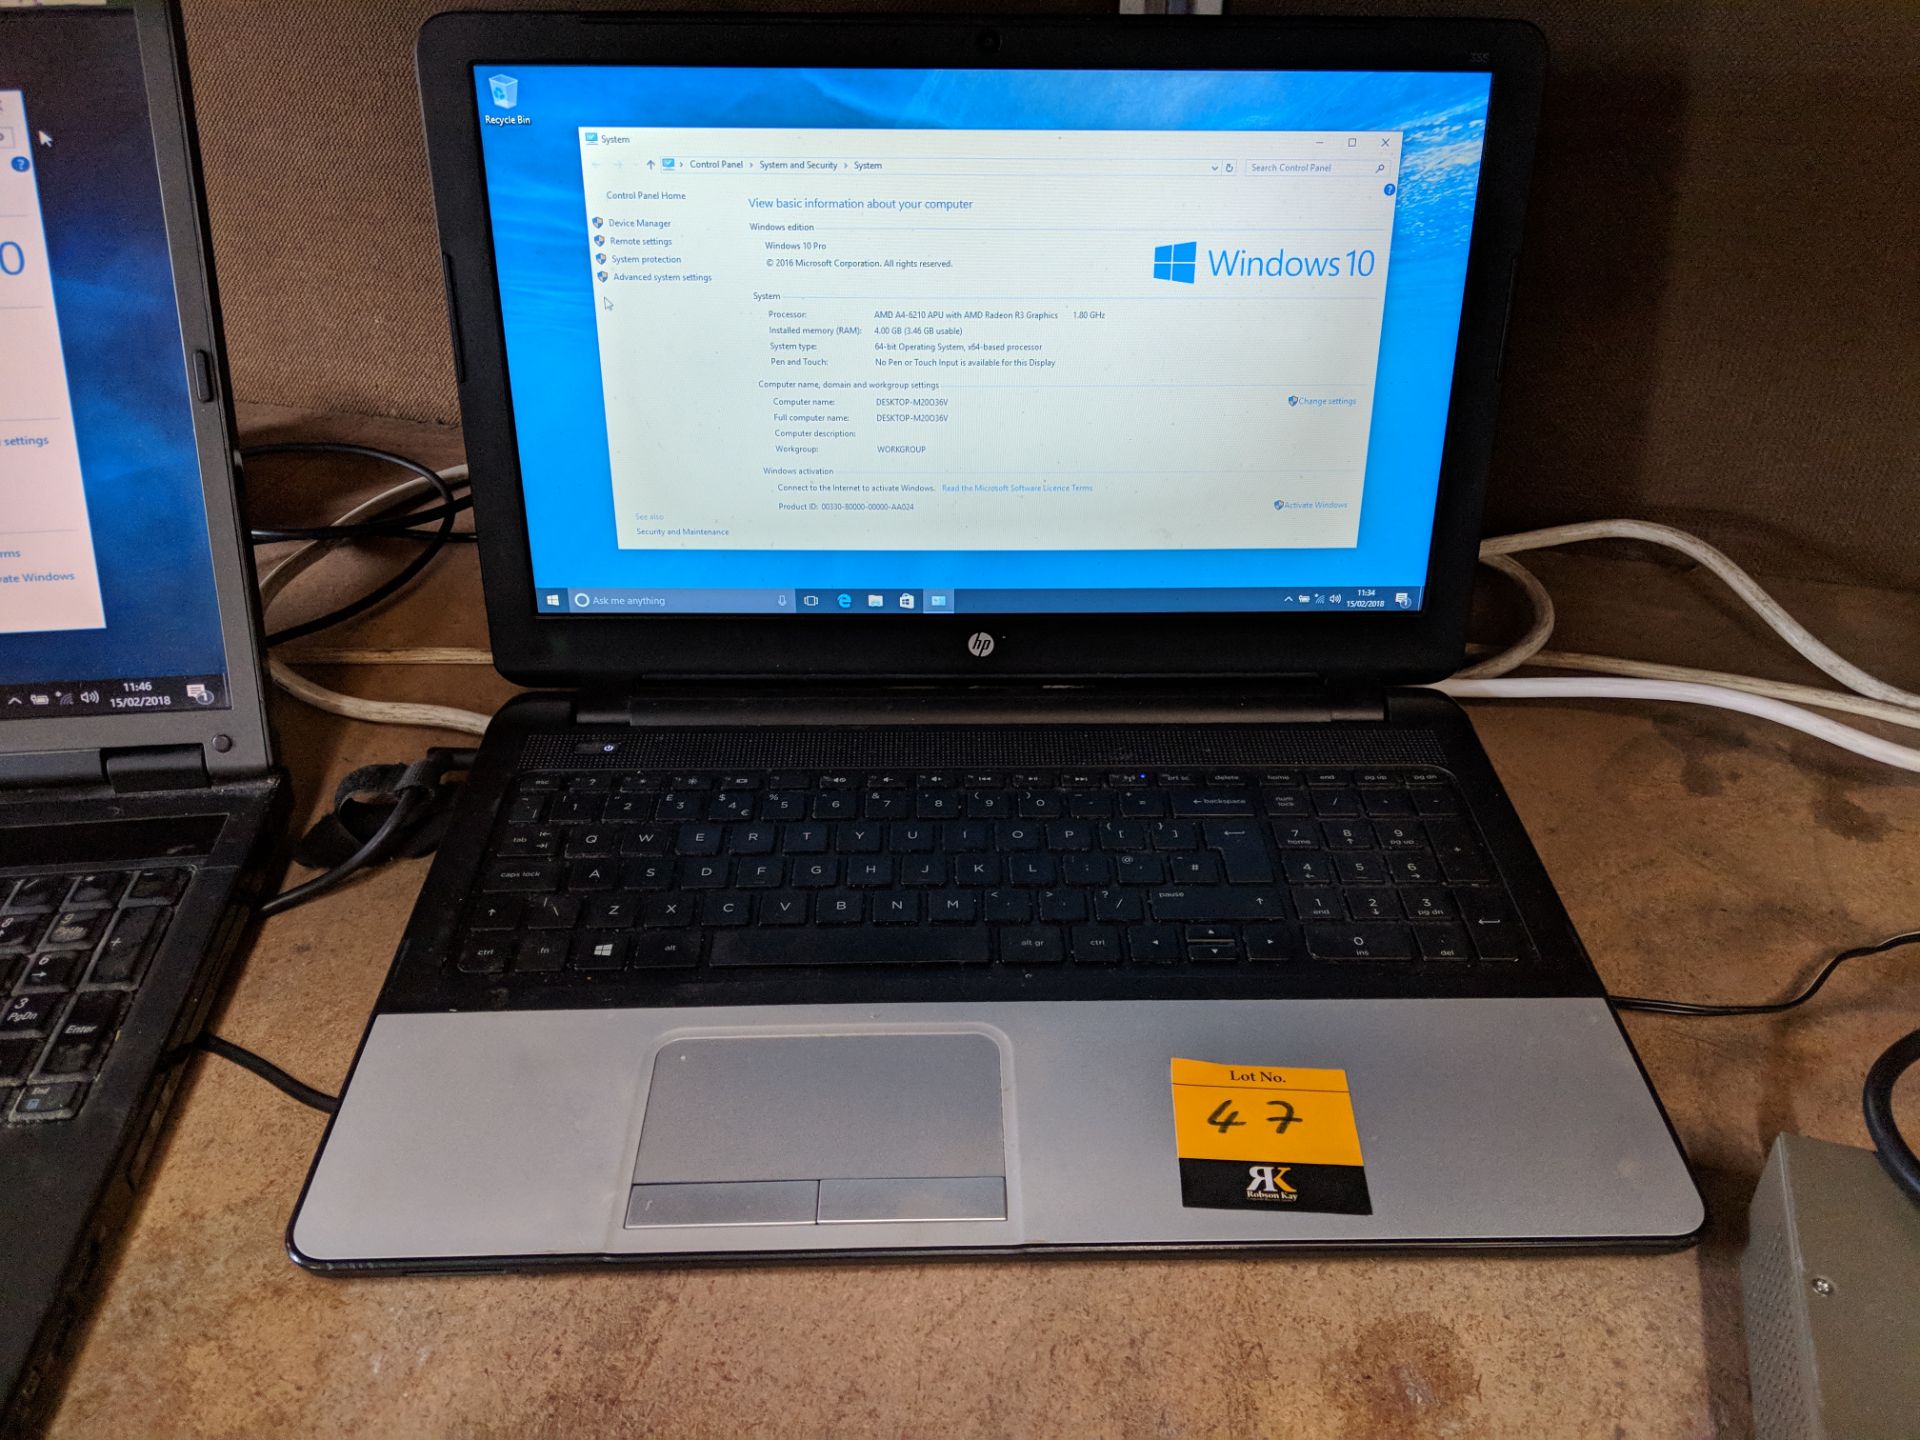 HP notebook computer model 355G2 with AMD A4-6210 APU, 4GB Ram, 500GB HDD, including power pack